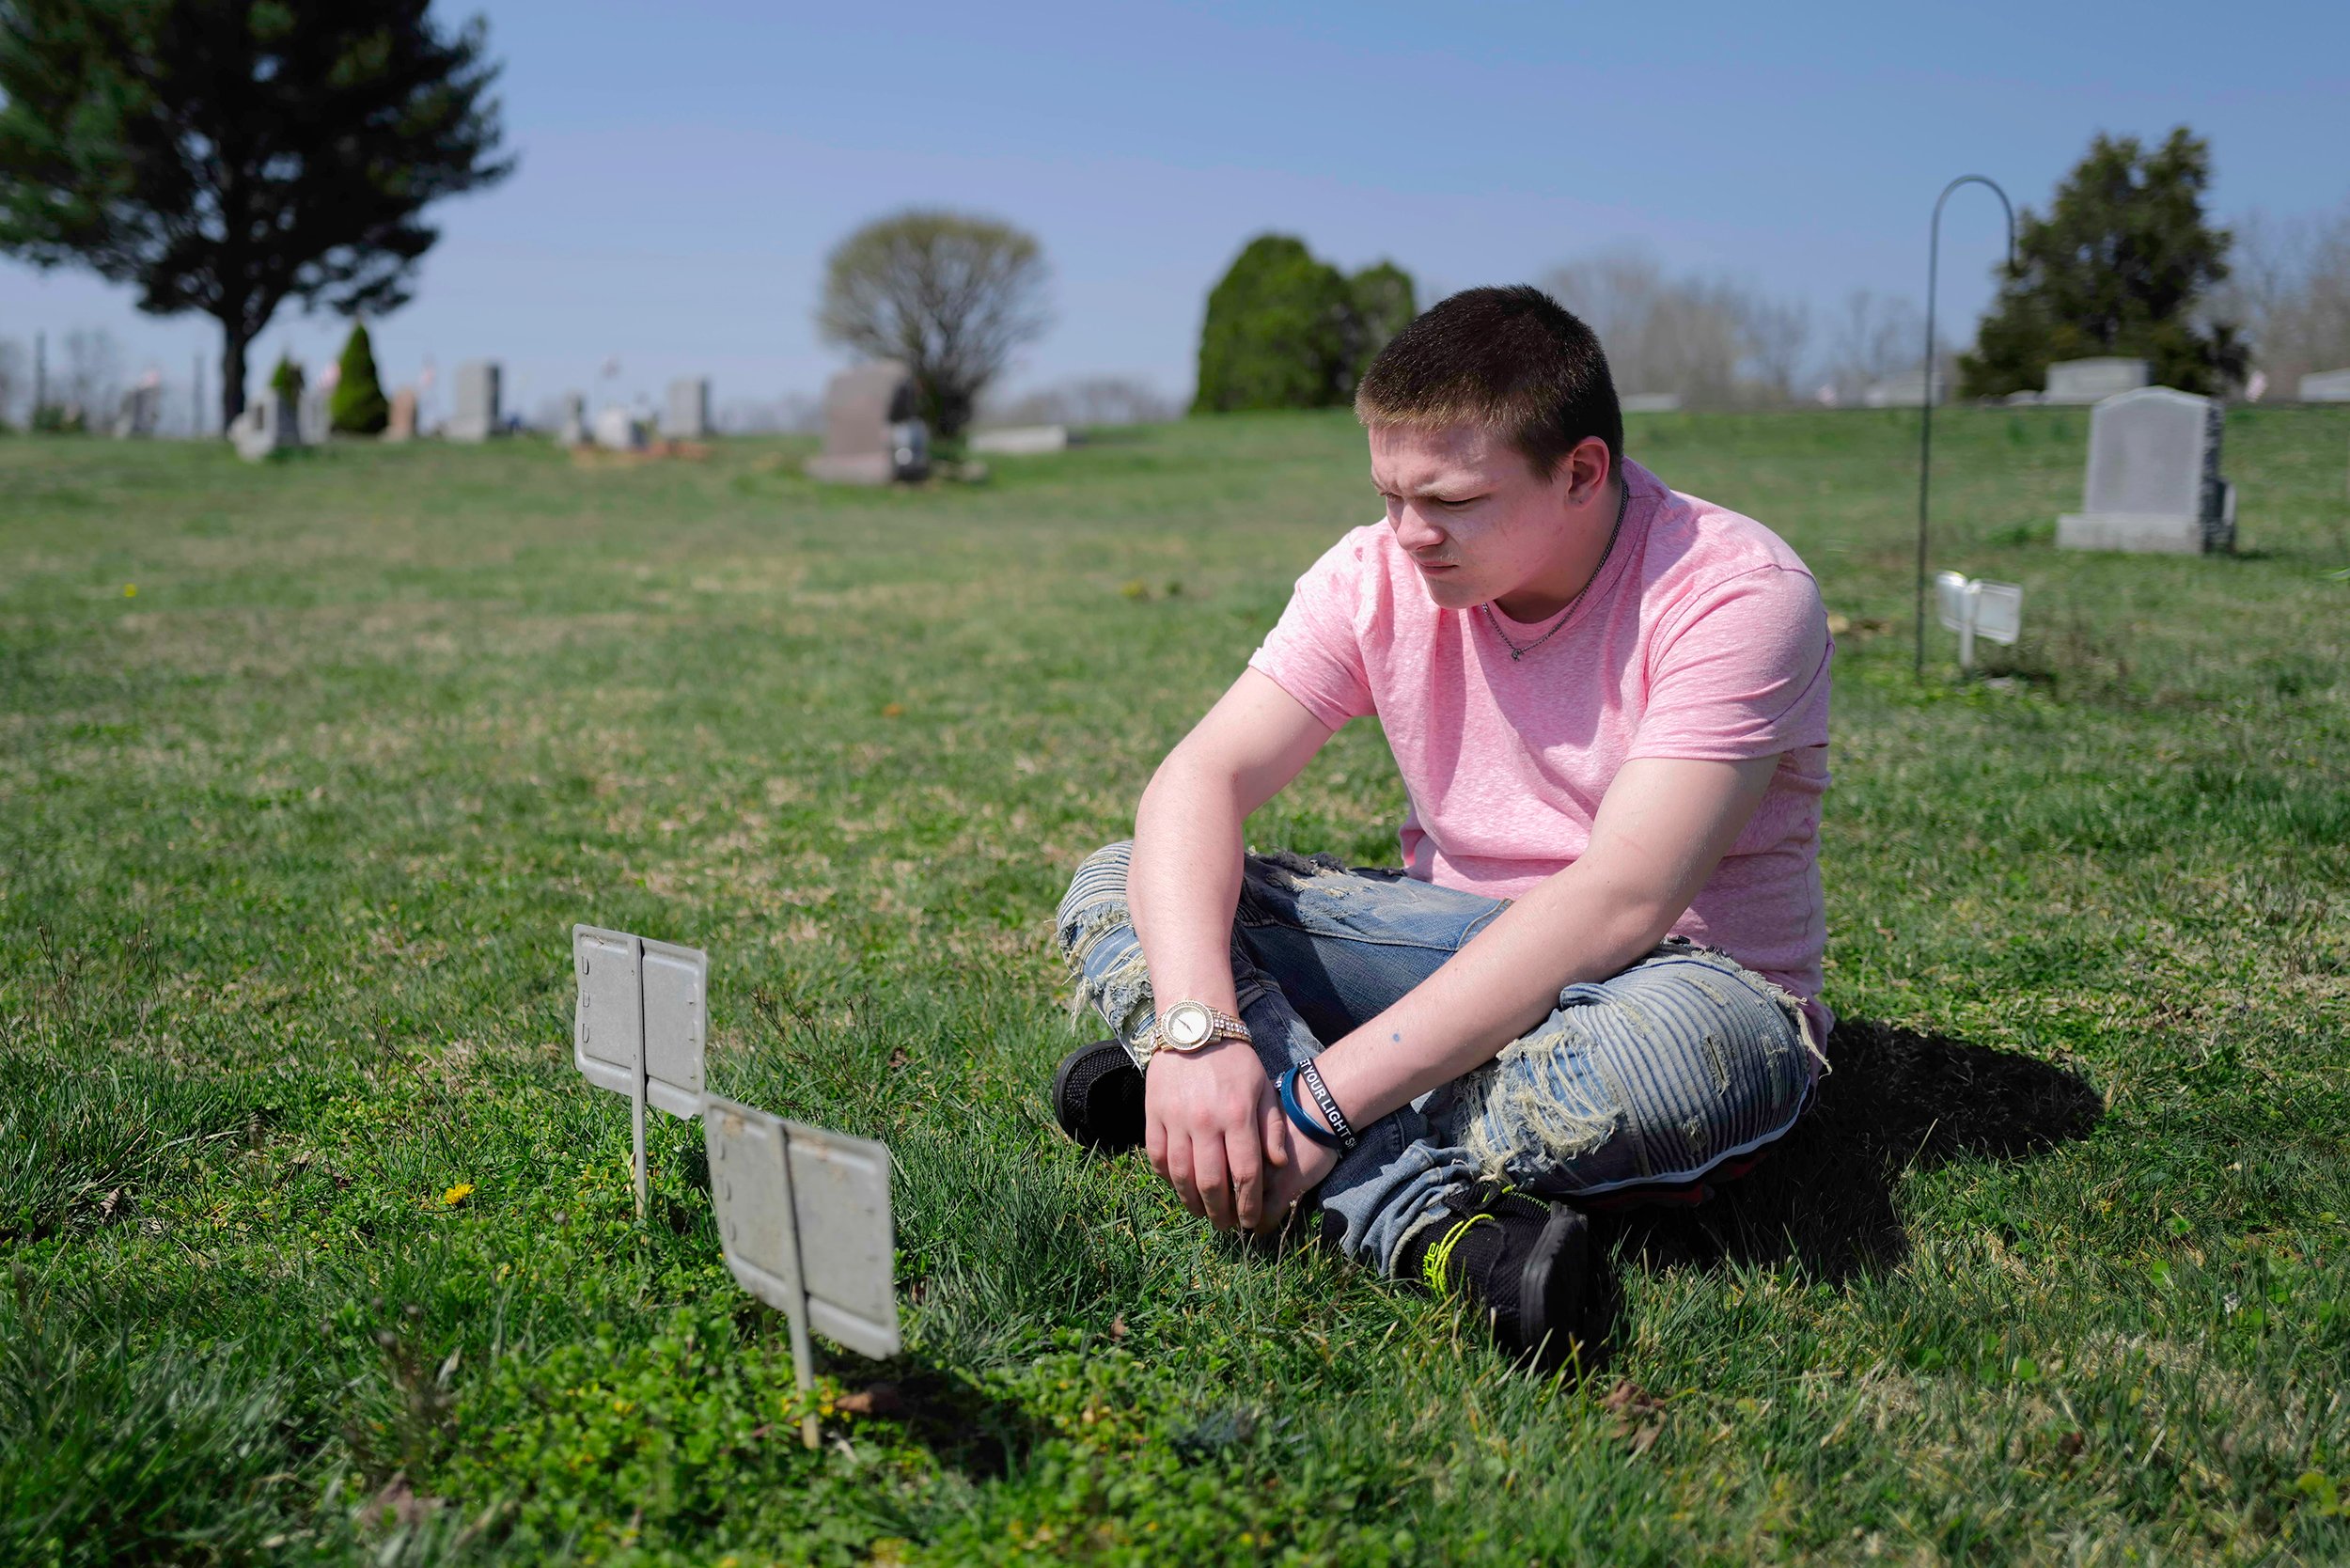  Reuben visits his father James and his uncle Kevin's grave at Hilltop Cemetery in Millfield, Ohio on April 4, 2021. “The first traumatic experience I experienced in life was the loss of my father. He drowned in his car… He’s a drug dealer and stuff 